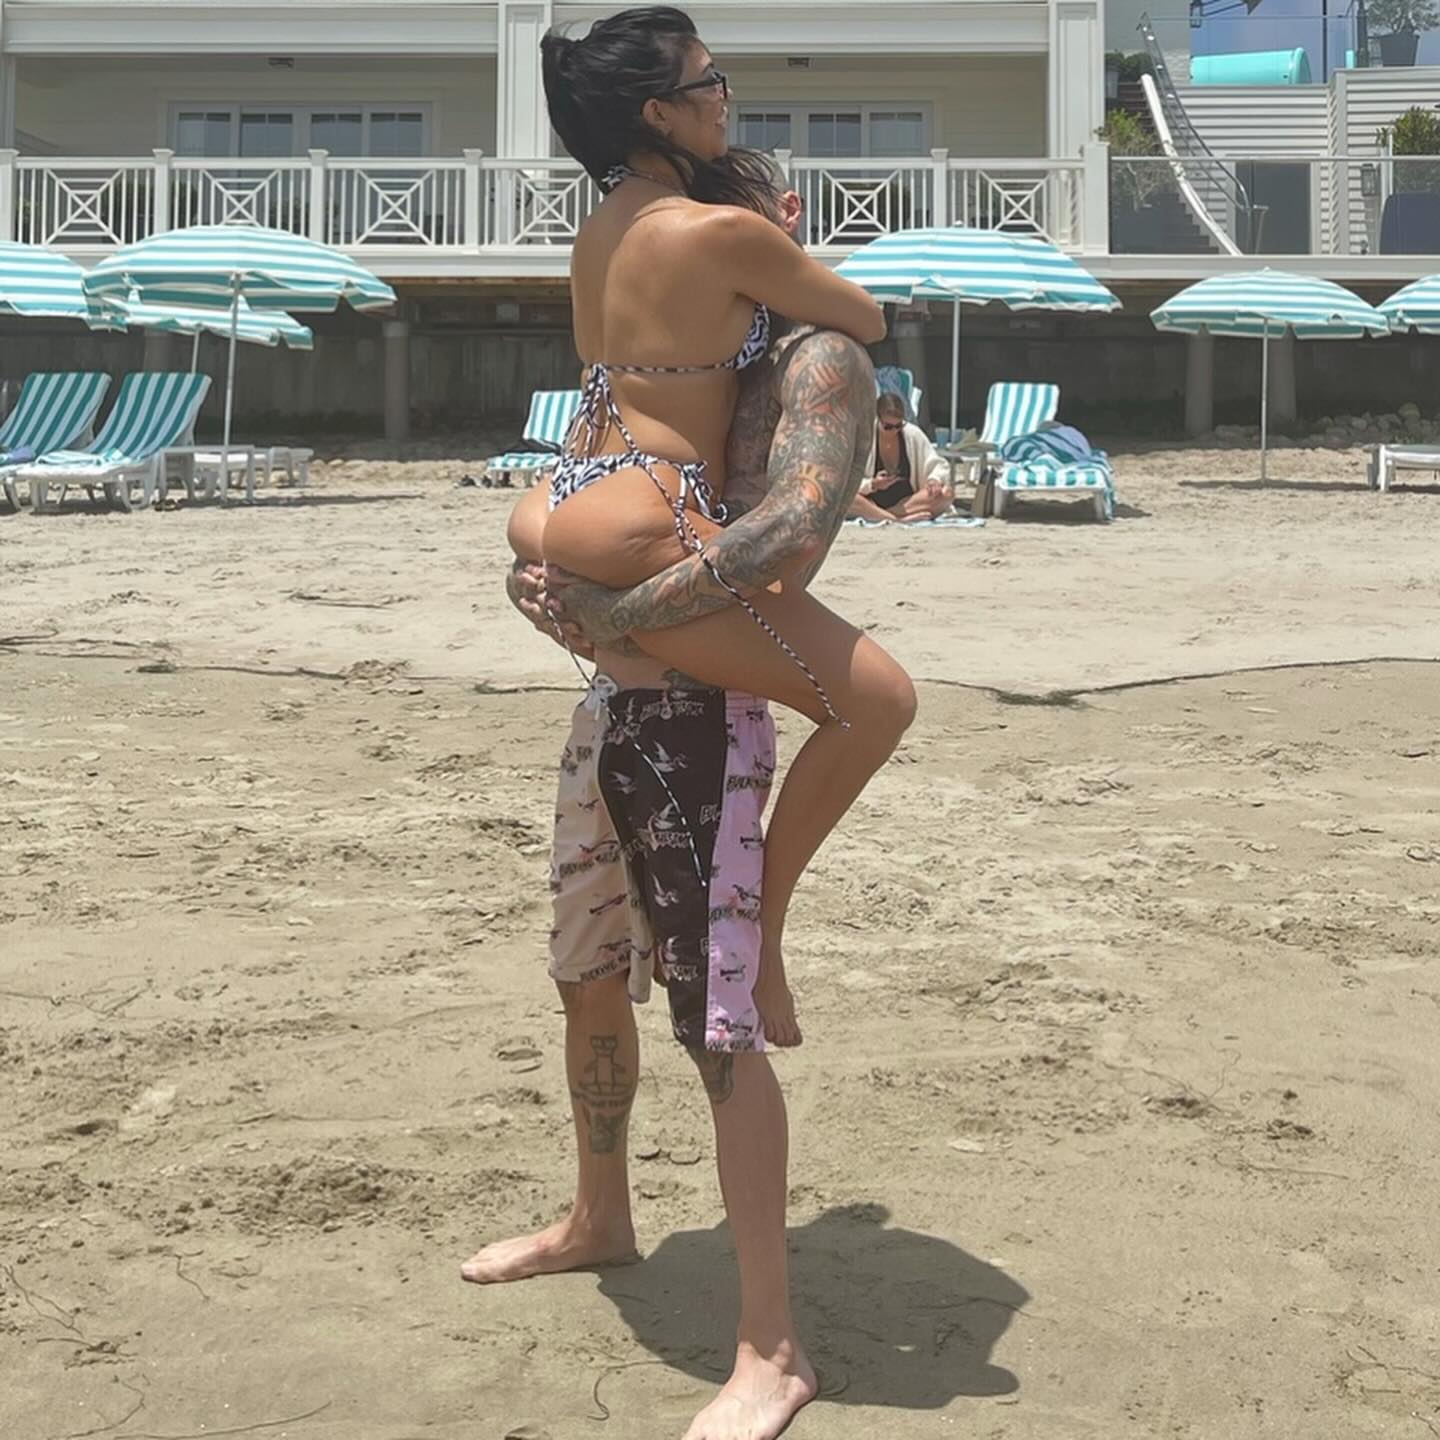 Included in the photo dump was a pic of Travis gripping Kourtney's butt